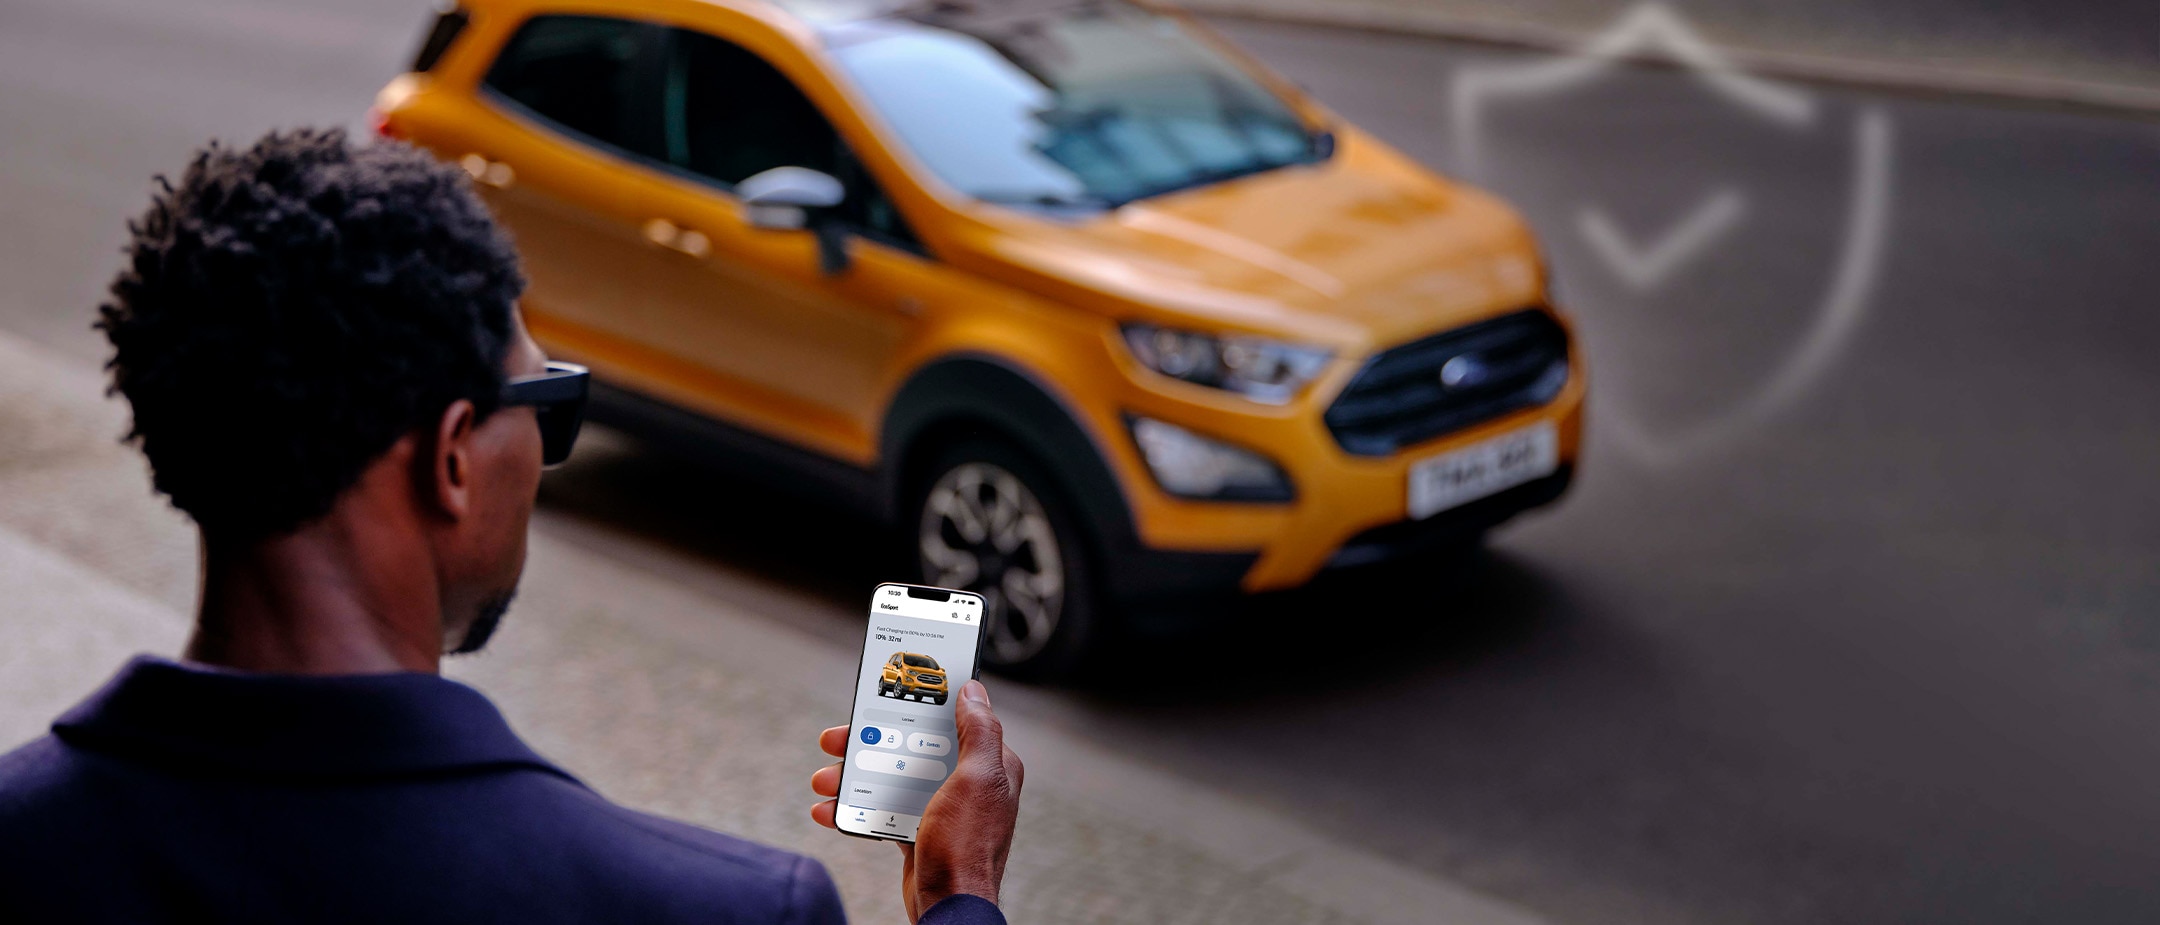 Man with phone checking app in mobile near Ford EcoSport